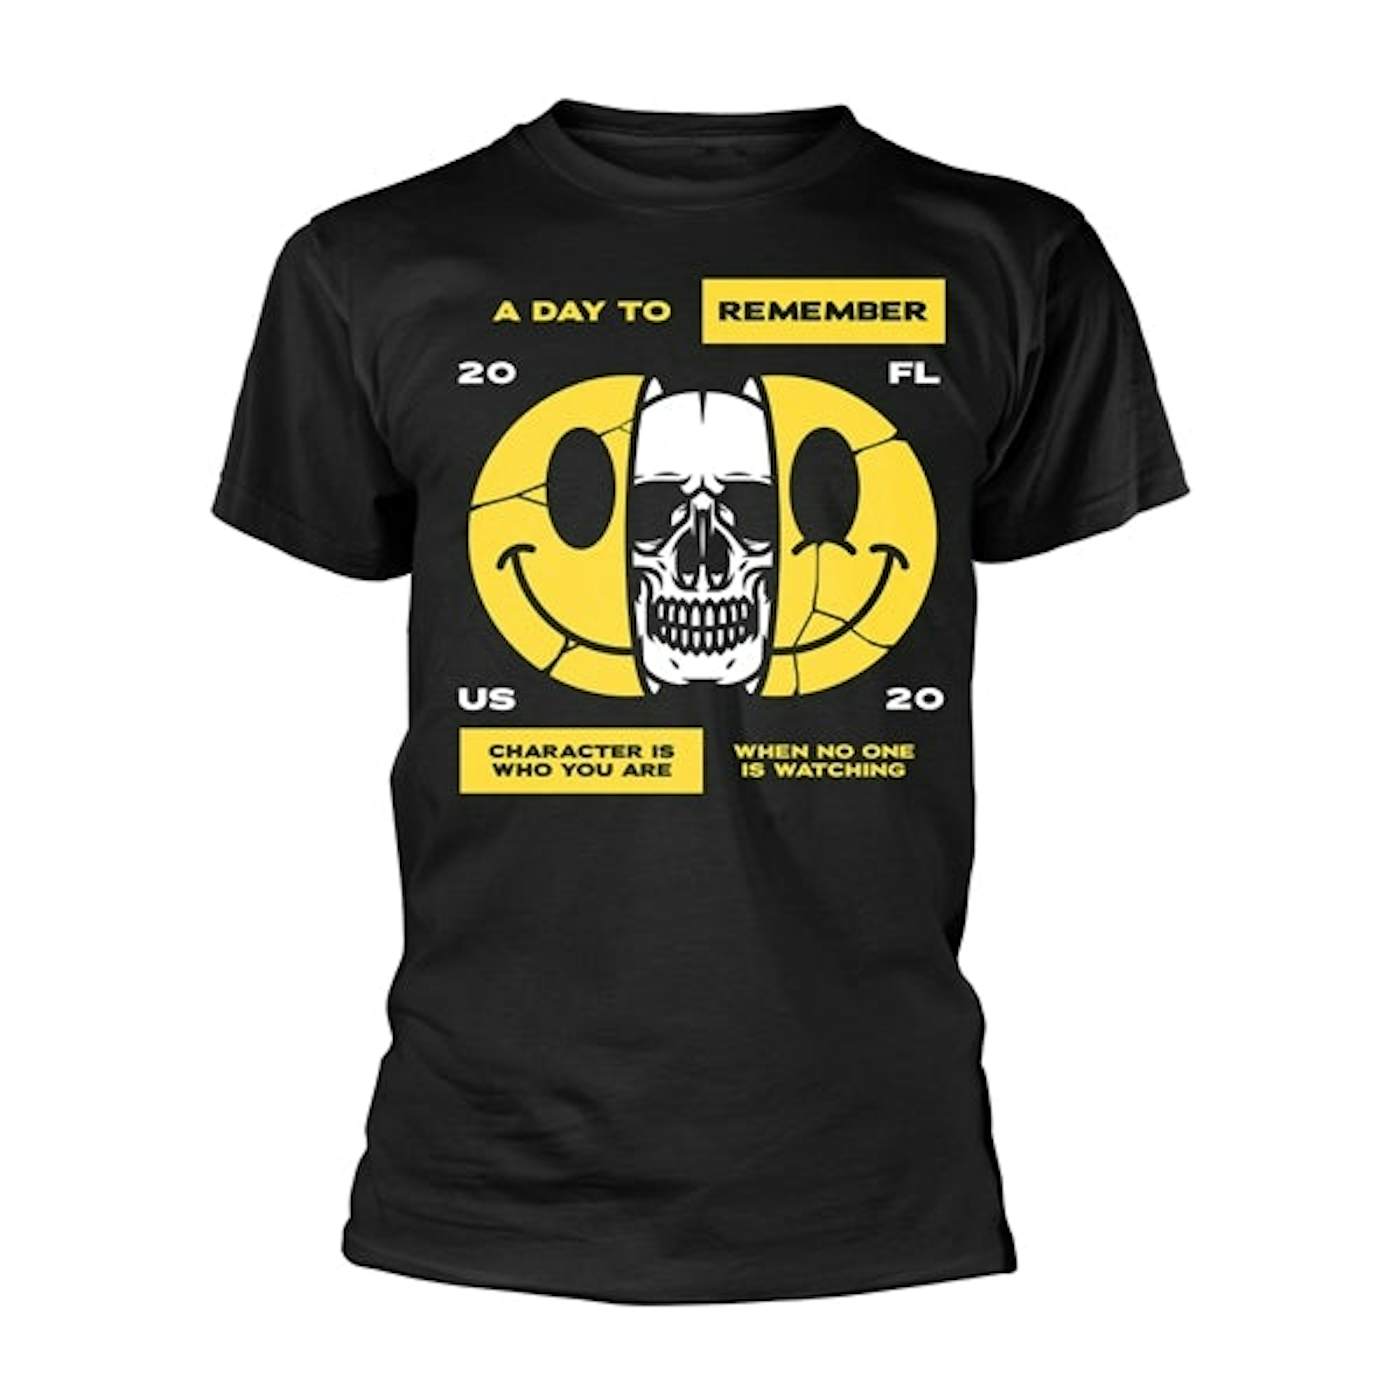 A Day To Remember T-Shirt - Character (Black)